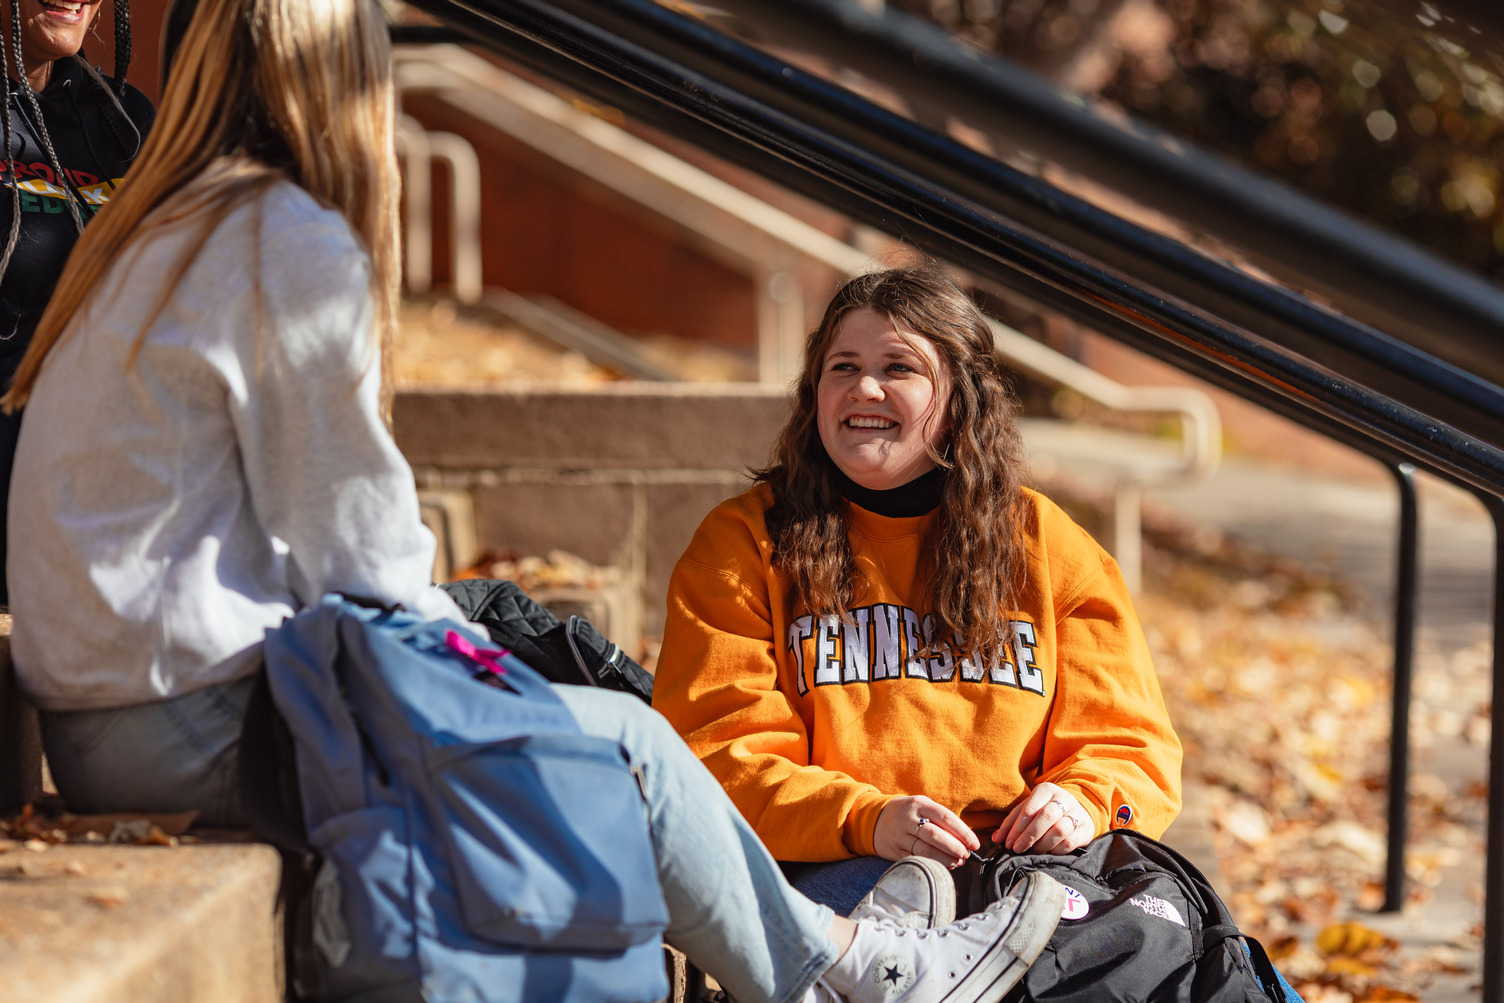 Student Ambassador wearing orange tennessee sweatshirt while sitting on stairs with two other students